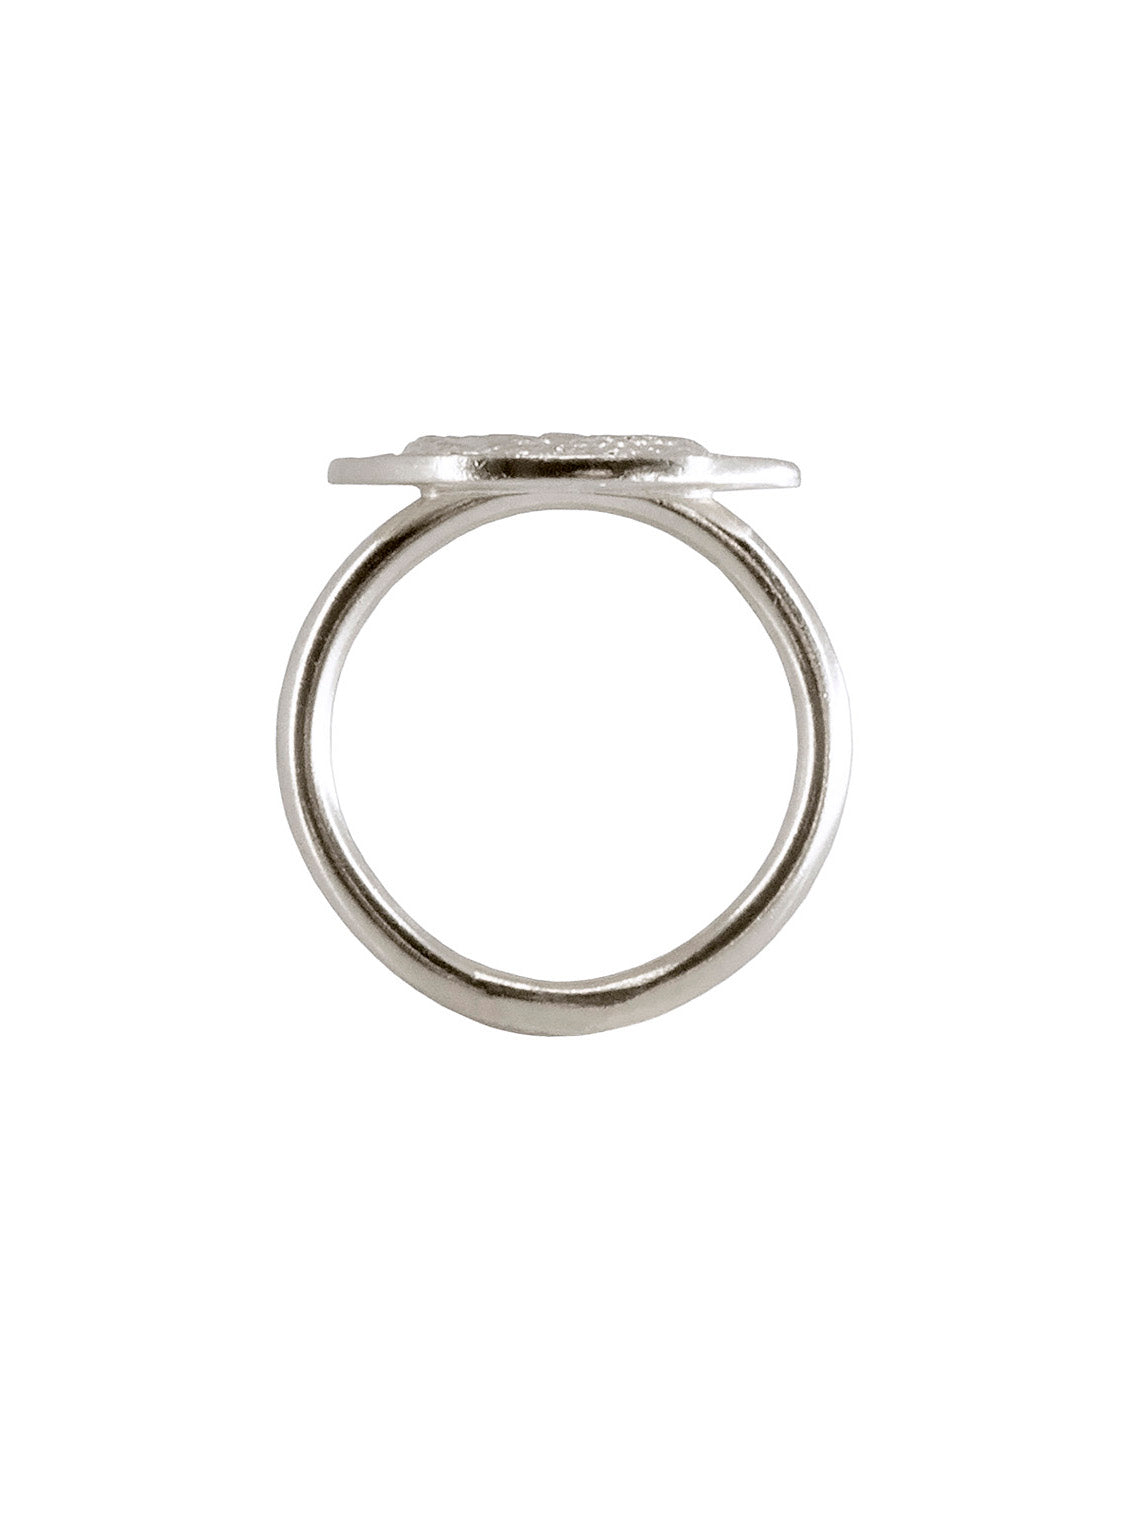 Blood type A Positive Ring. Sterling Silver.Grupo sanguineo Anillo, Plata de Ley